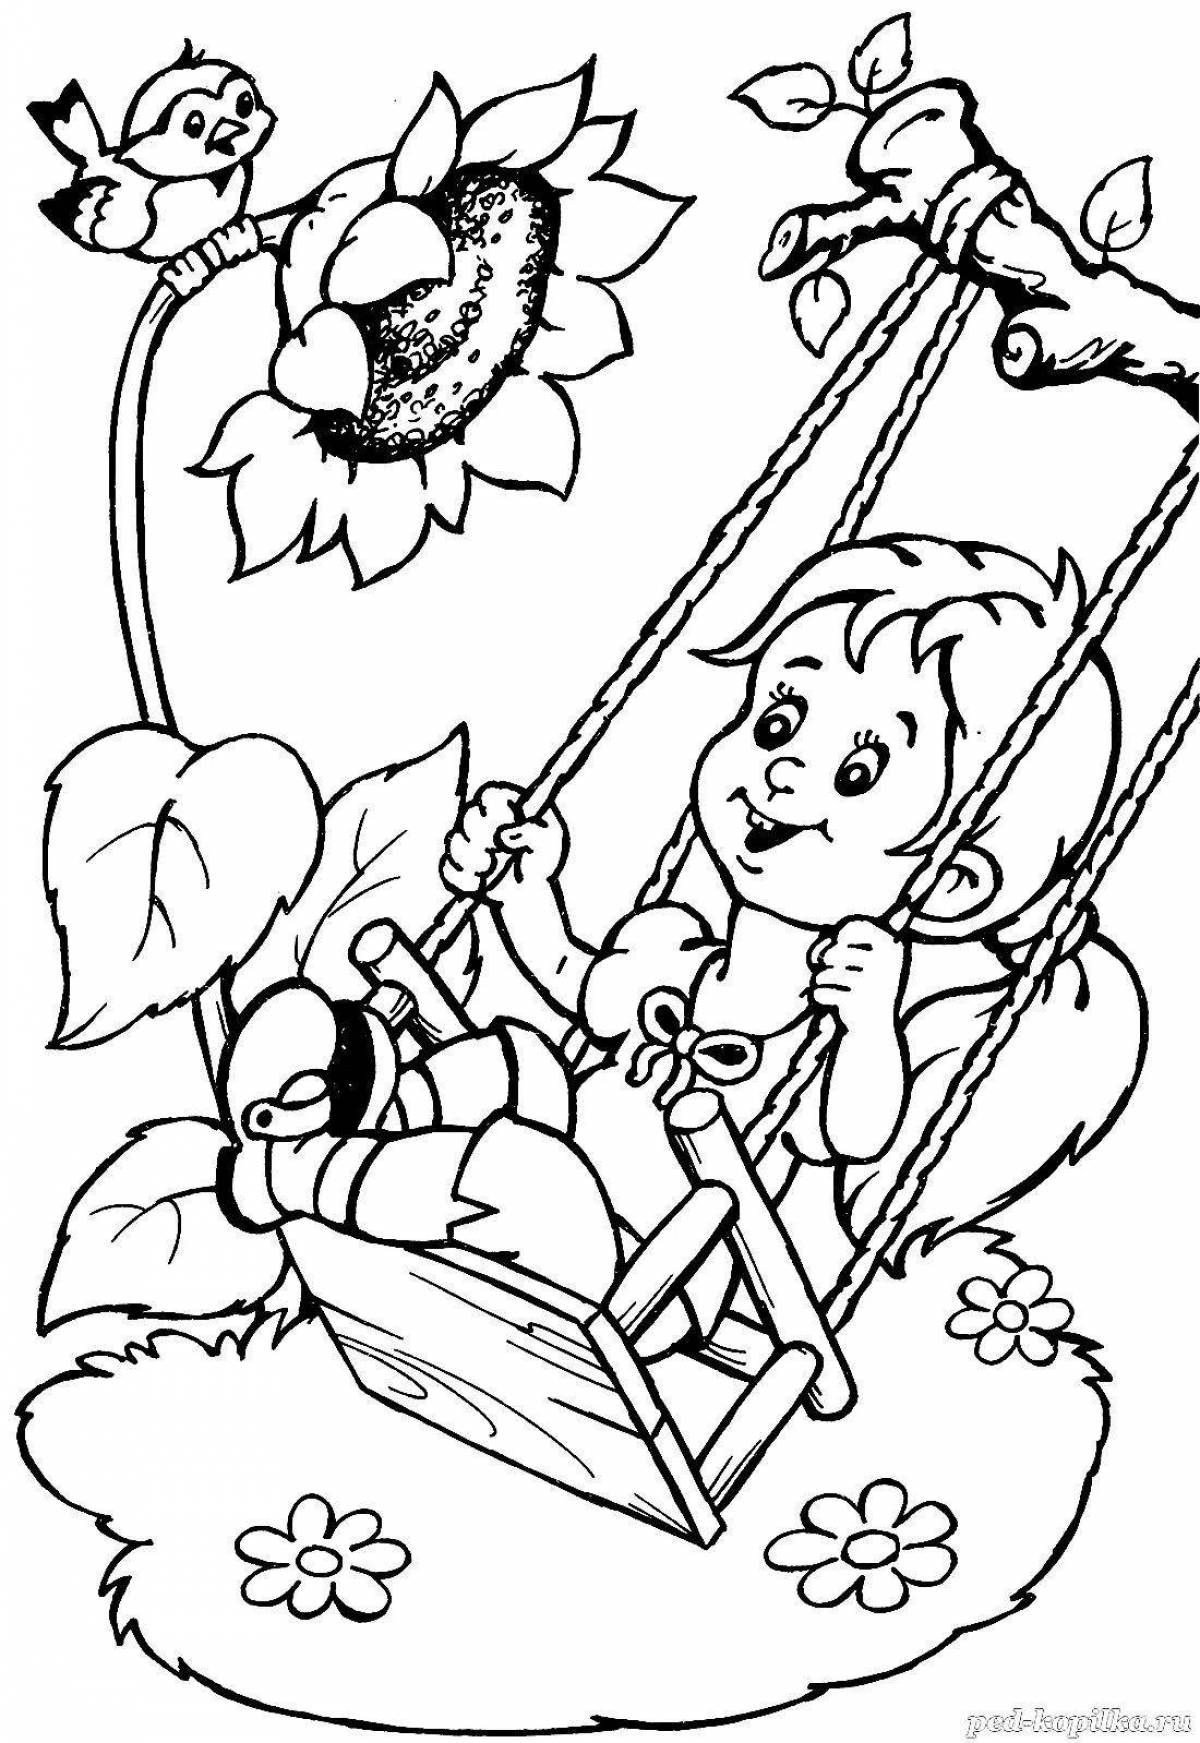 Coloring page wild girl on a swing